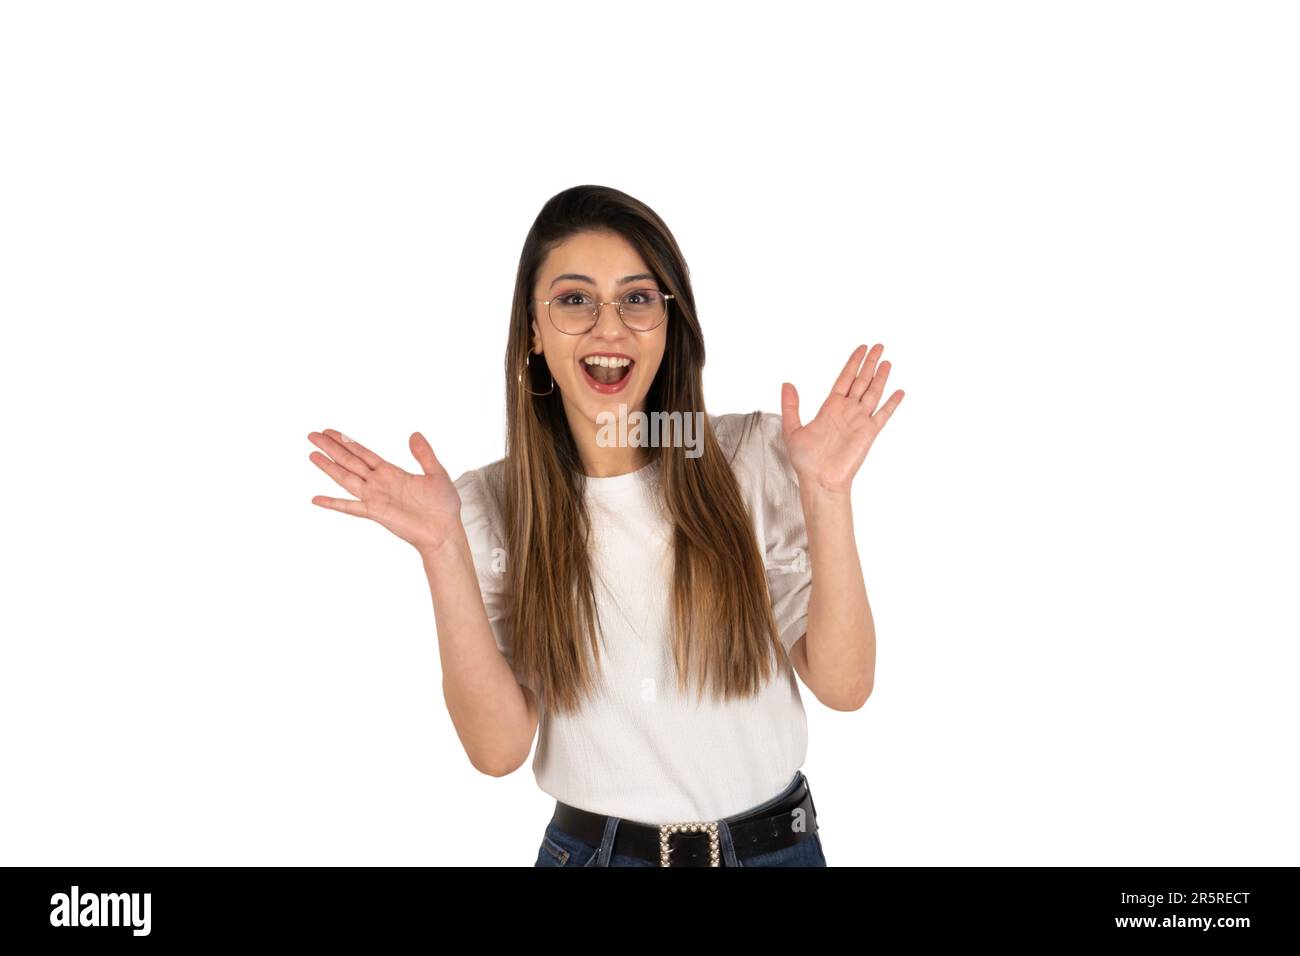 Shocked girl. Isolated white background, copy space. Excited lady taking good news concept idea. Looking camera. Surprised smiling brunette woman. Stock Photo